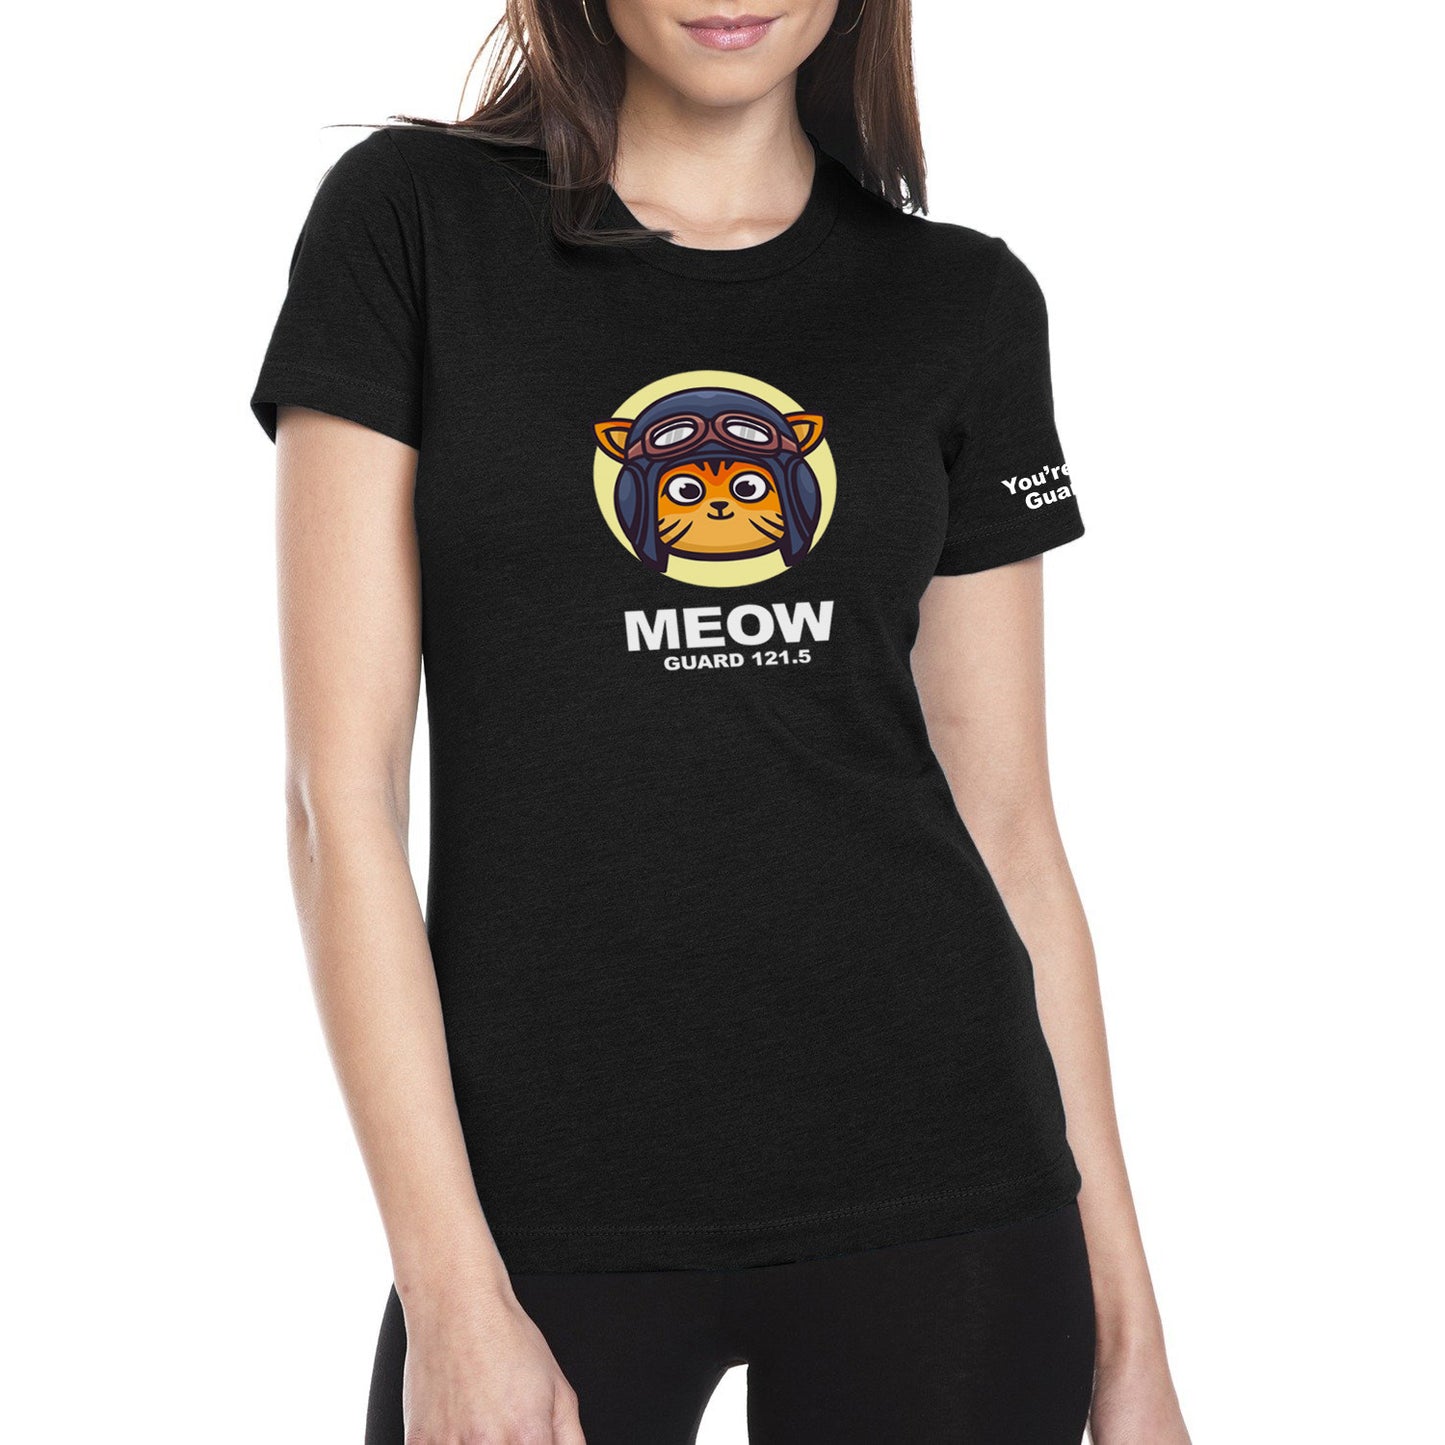 Meow on Guard T-shirt